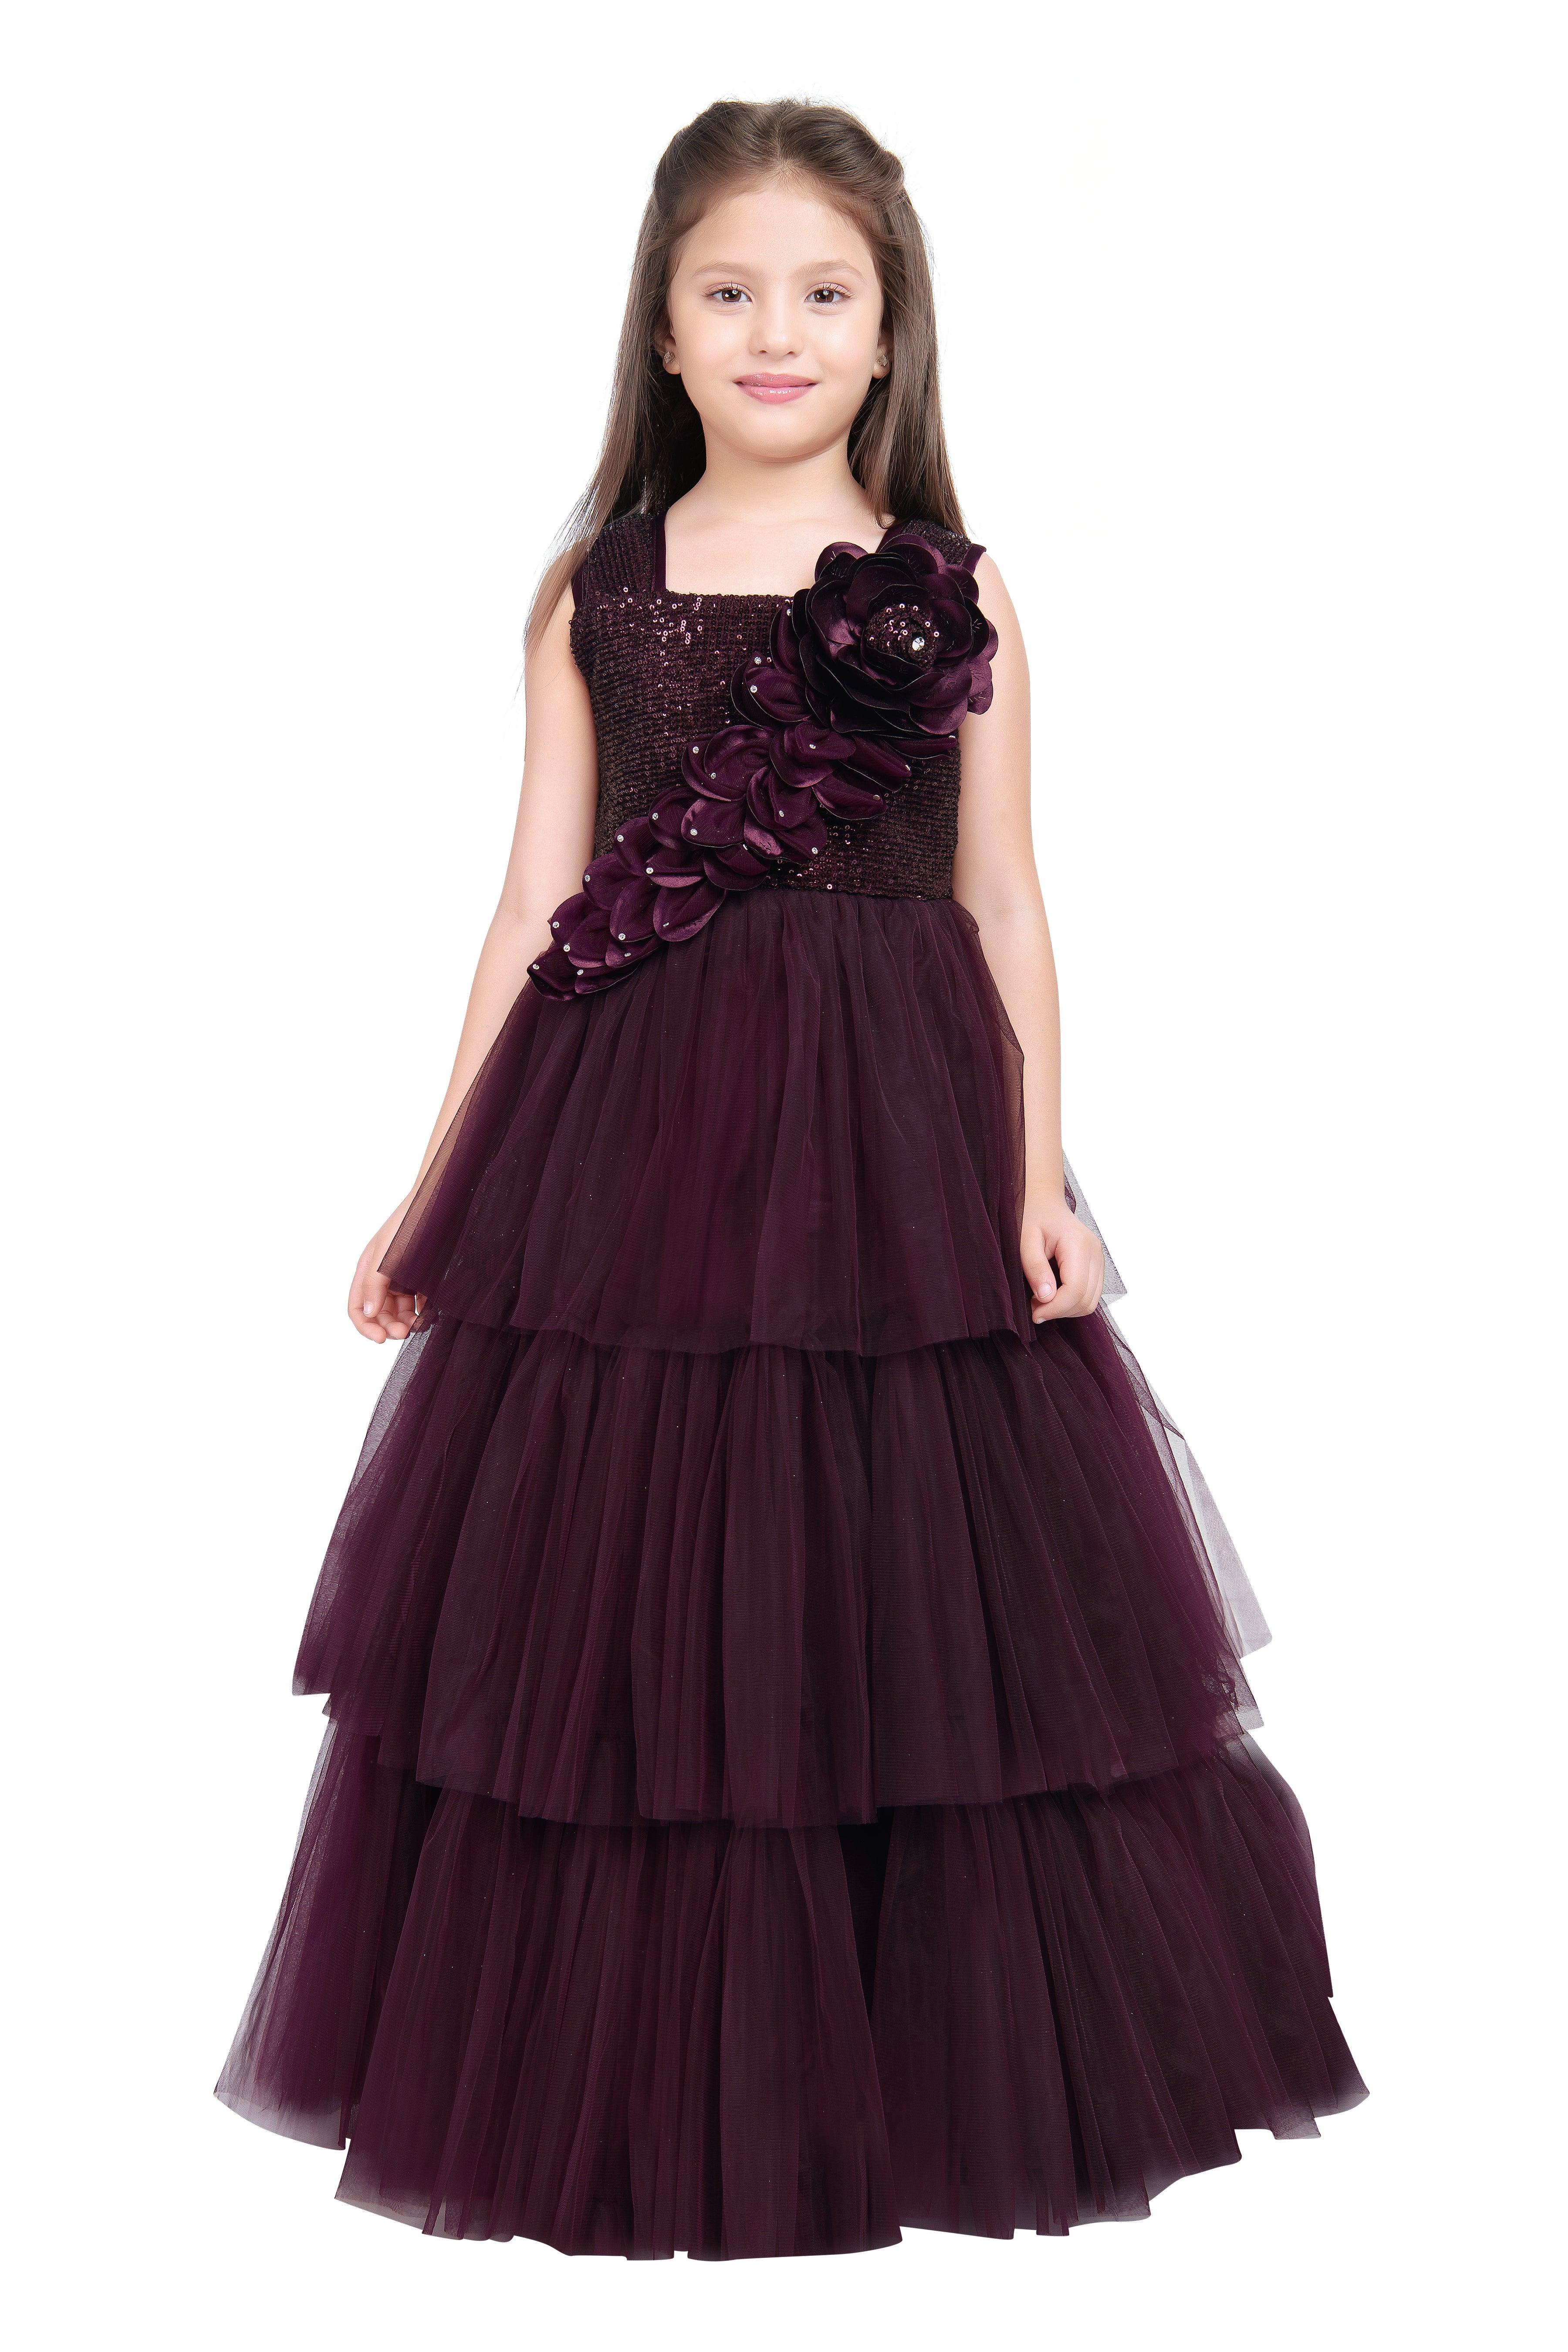 Flower Girl Long Princess Dress Vintage Lace Maxi Gown Kids Formal Wedding  Bridesmaid Pageant Tulle Dresses Little Big Girls Bowknot Dance First  Communion Birthday Prom Dresses 9-10 Years Navy Blue - Walmart.com